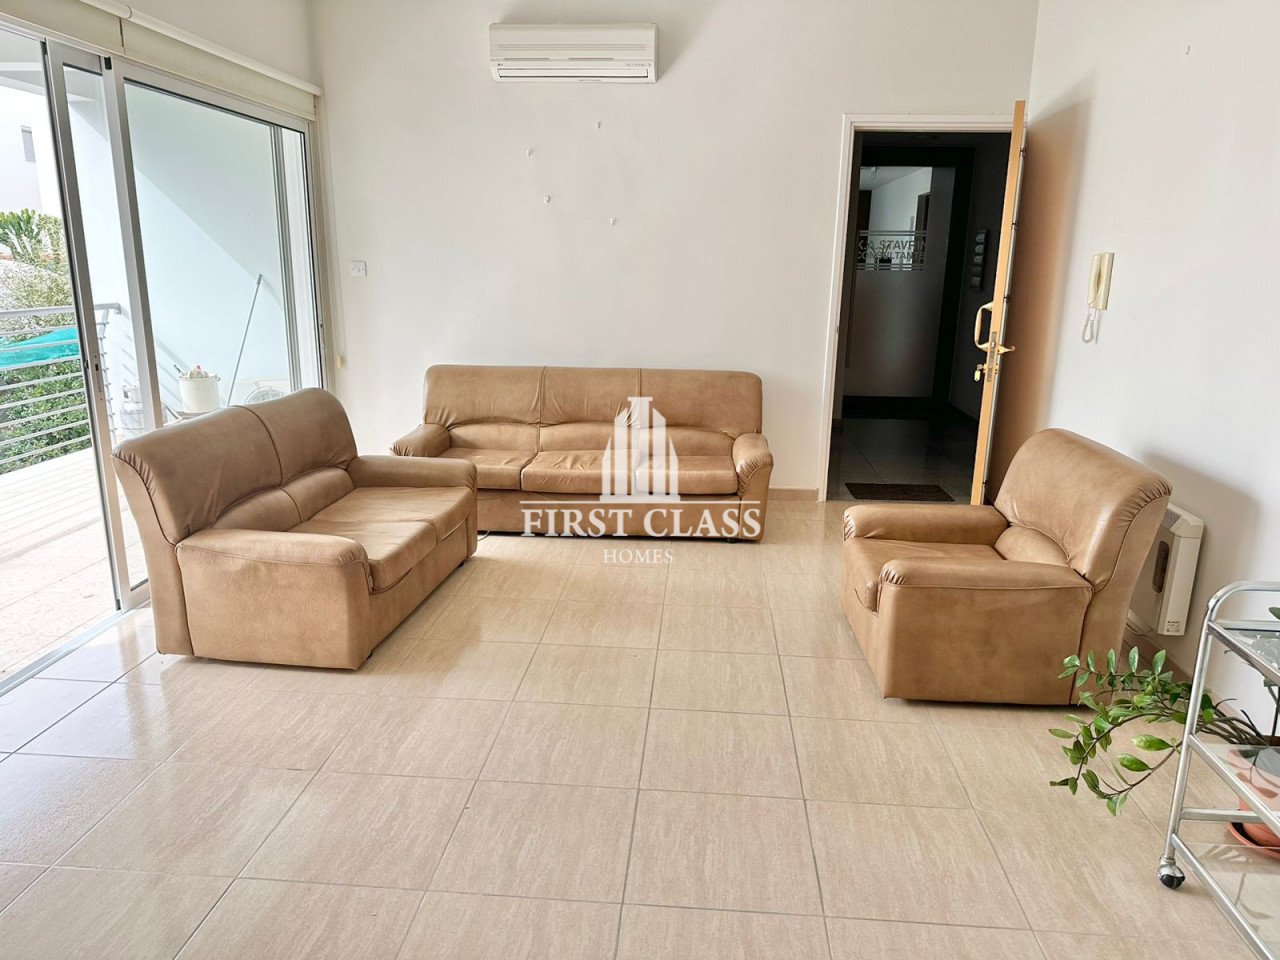 Property for Rent: Apartment (Flat) in Strovolos, Nicosia for rent | Key Realtor Cyprus